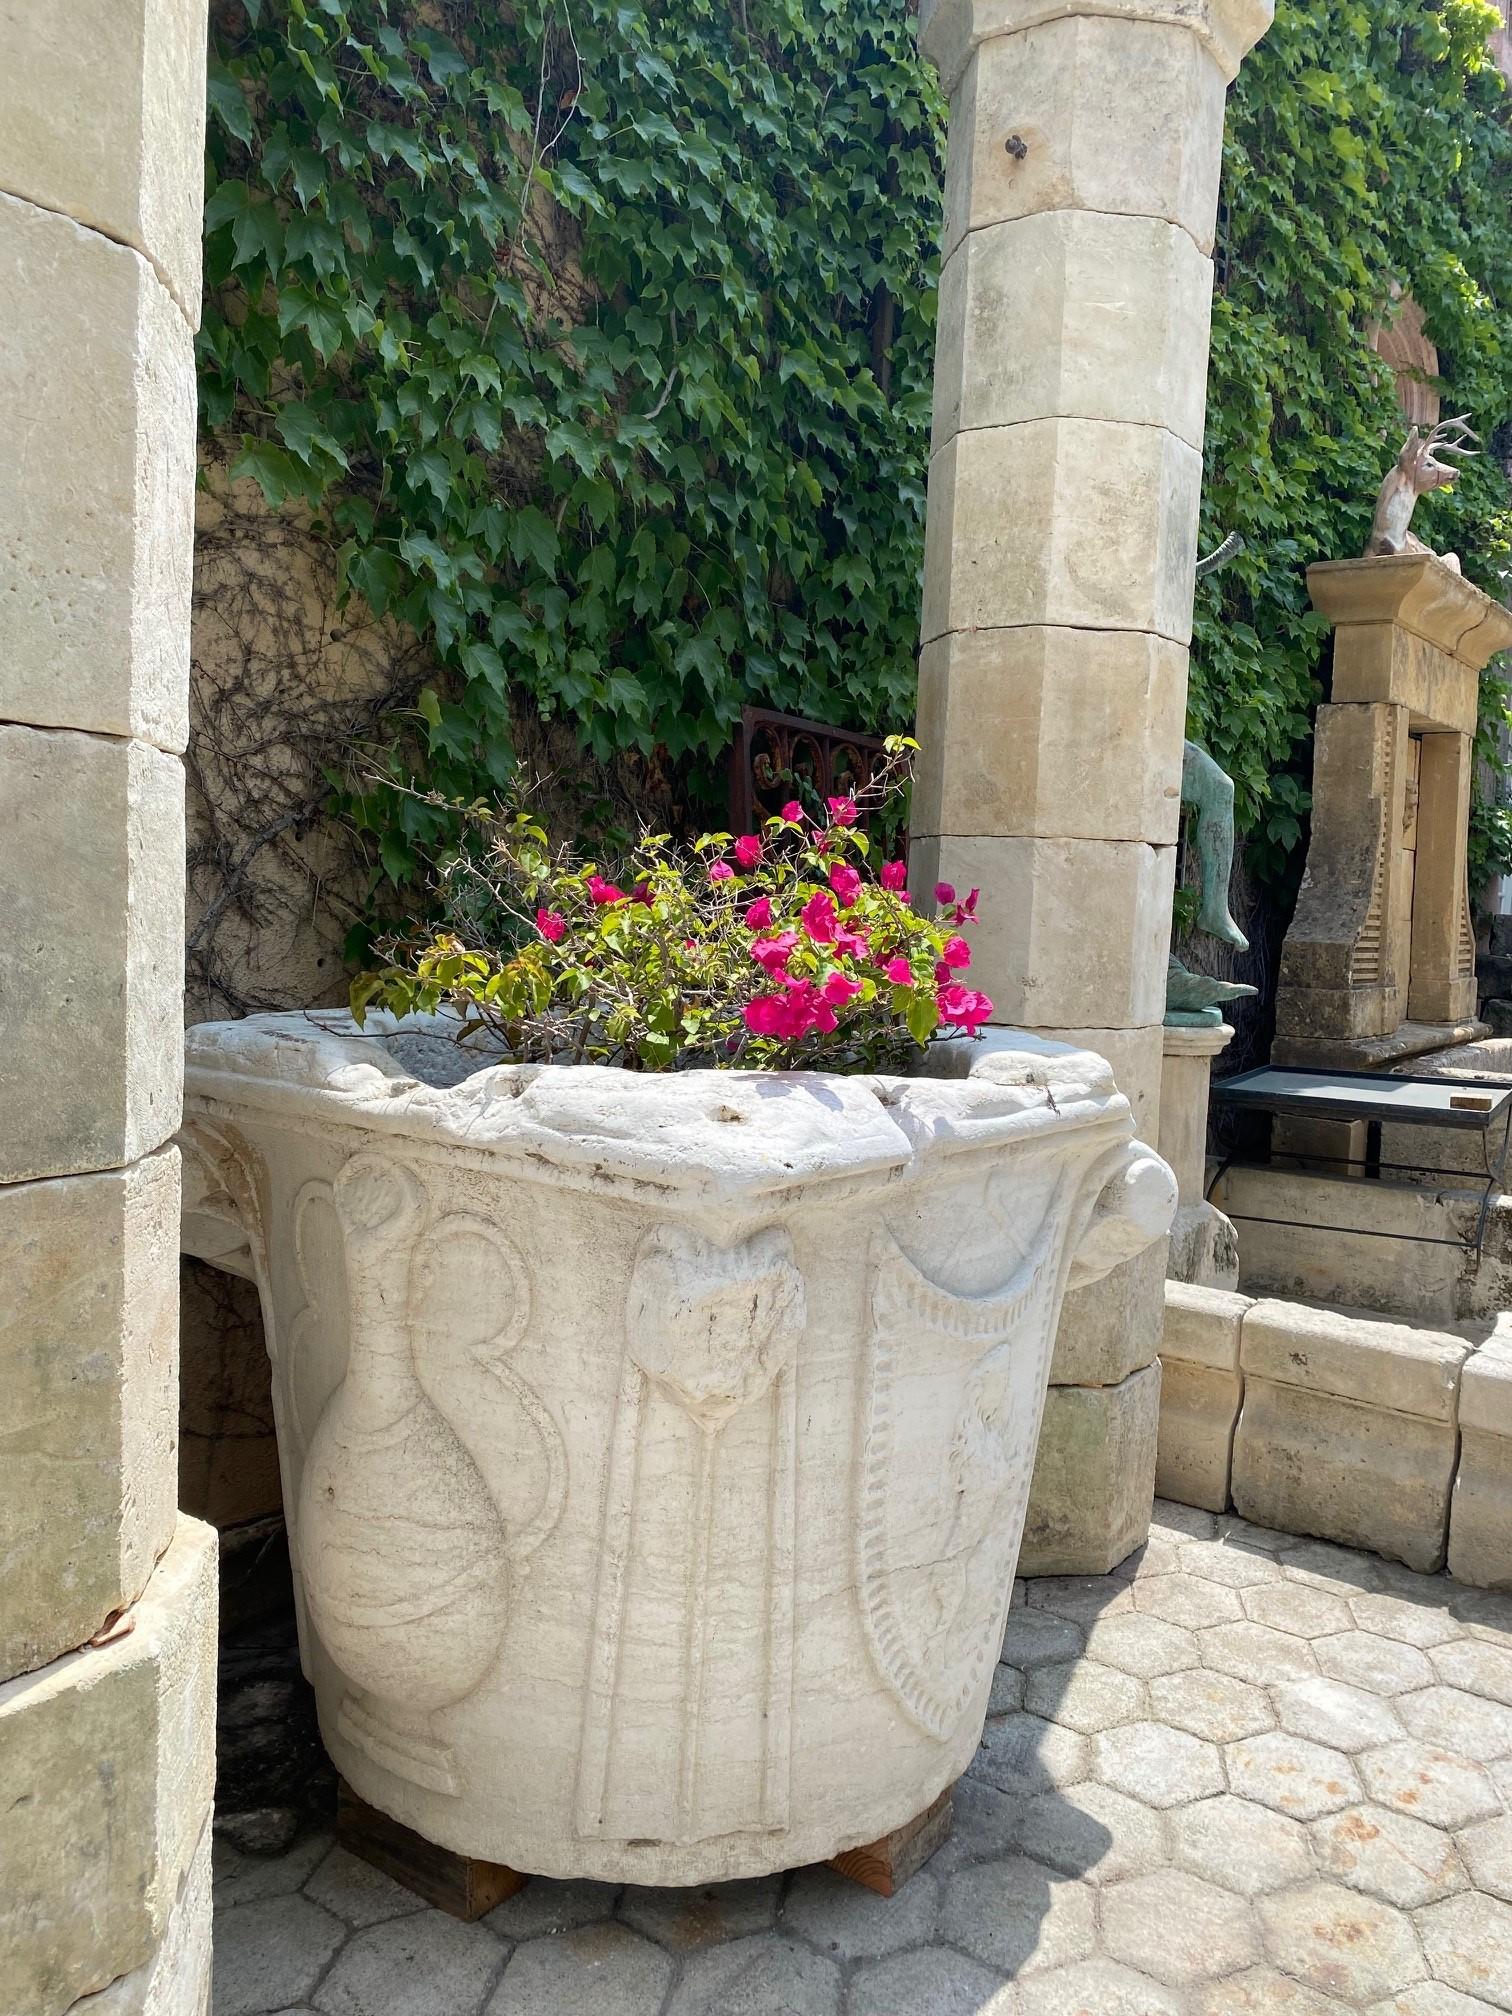 Renaissance Wellhead Hand Carved Marble Container Planter Basin Water Fountain . A rare and impressive Historic Italian 15th century Renaissance hand carved marble well head square shape with scrolls to the corners. Decorated with 3-dimensional